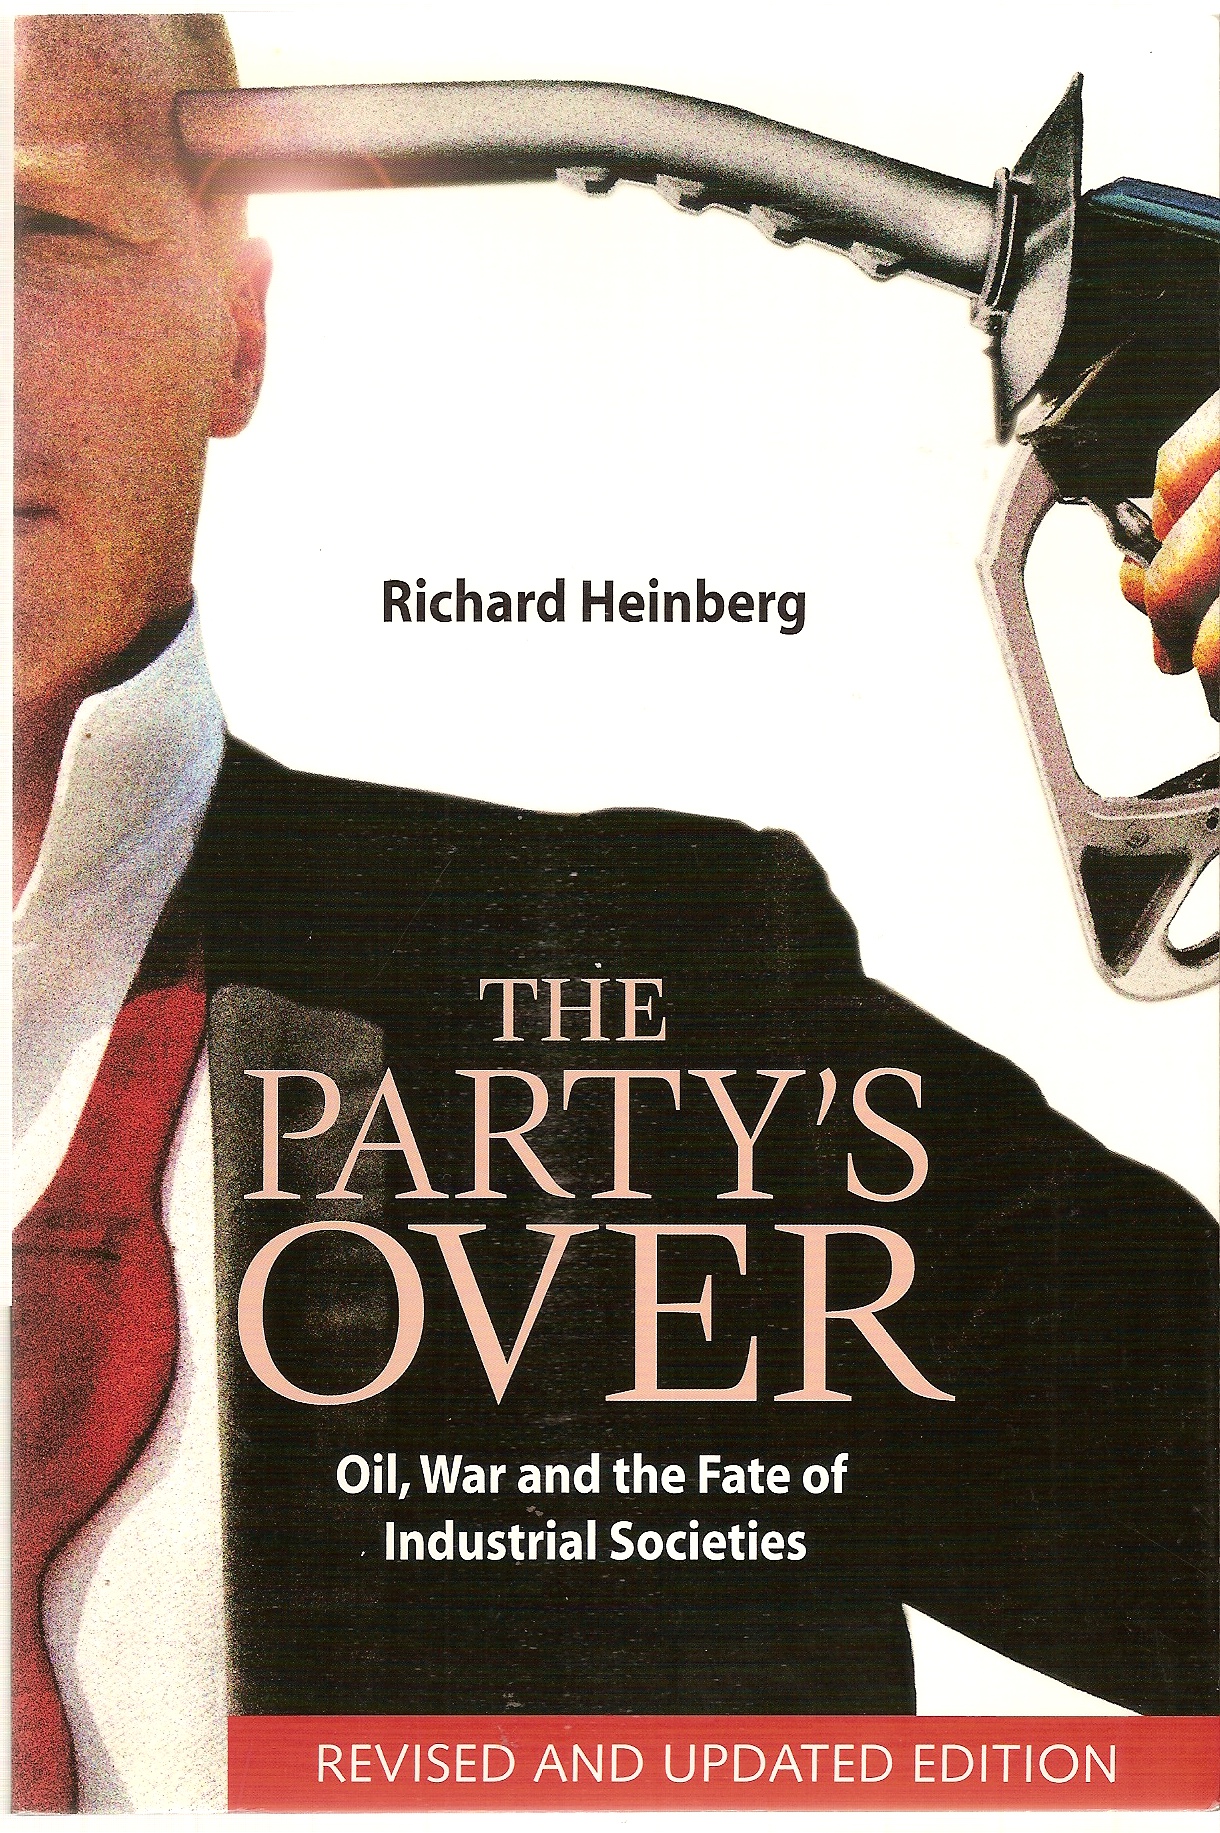 HEINBERG, RICHARD - The Party's over Oil, War and the Fate of Industrial Societies